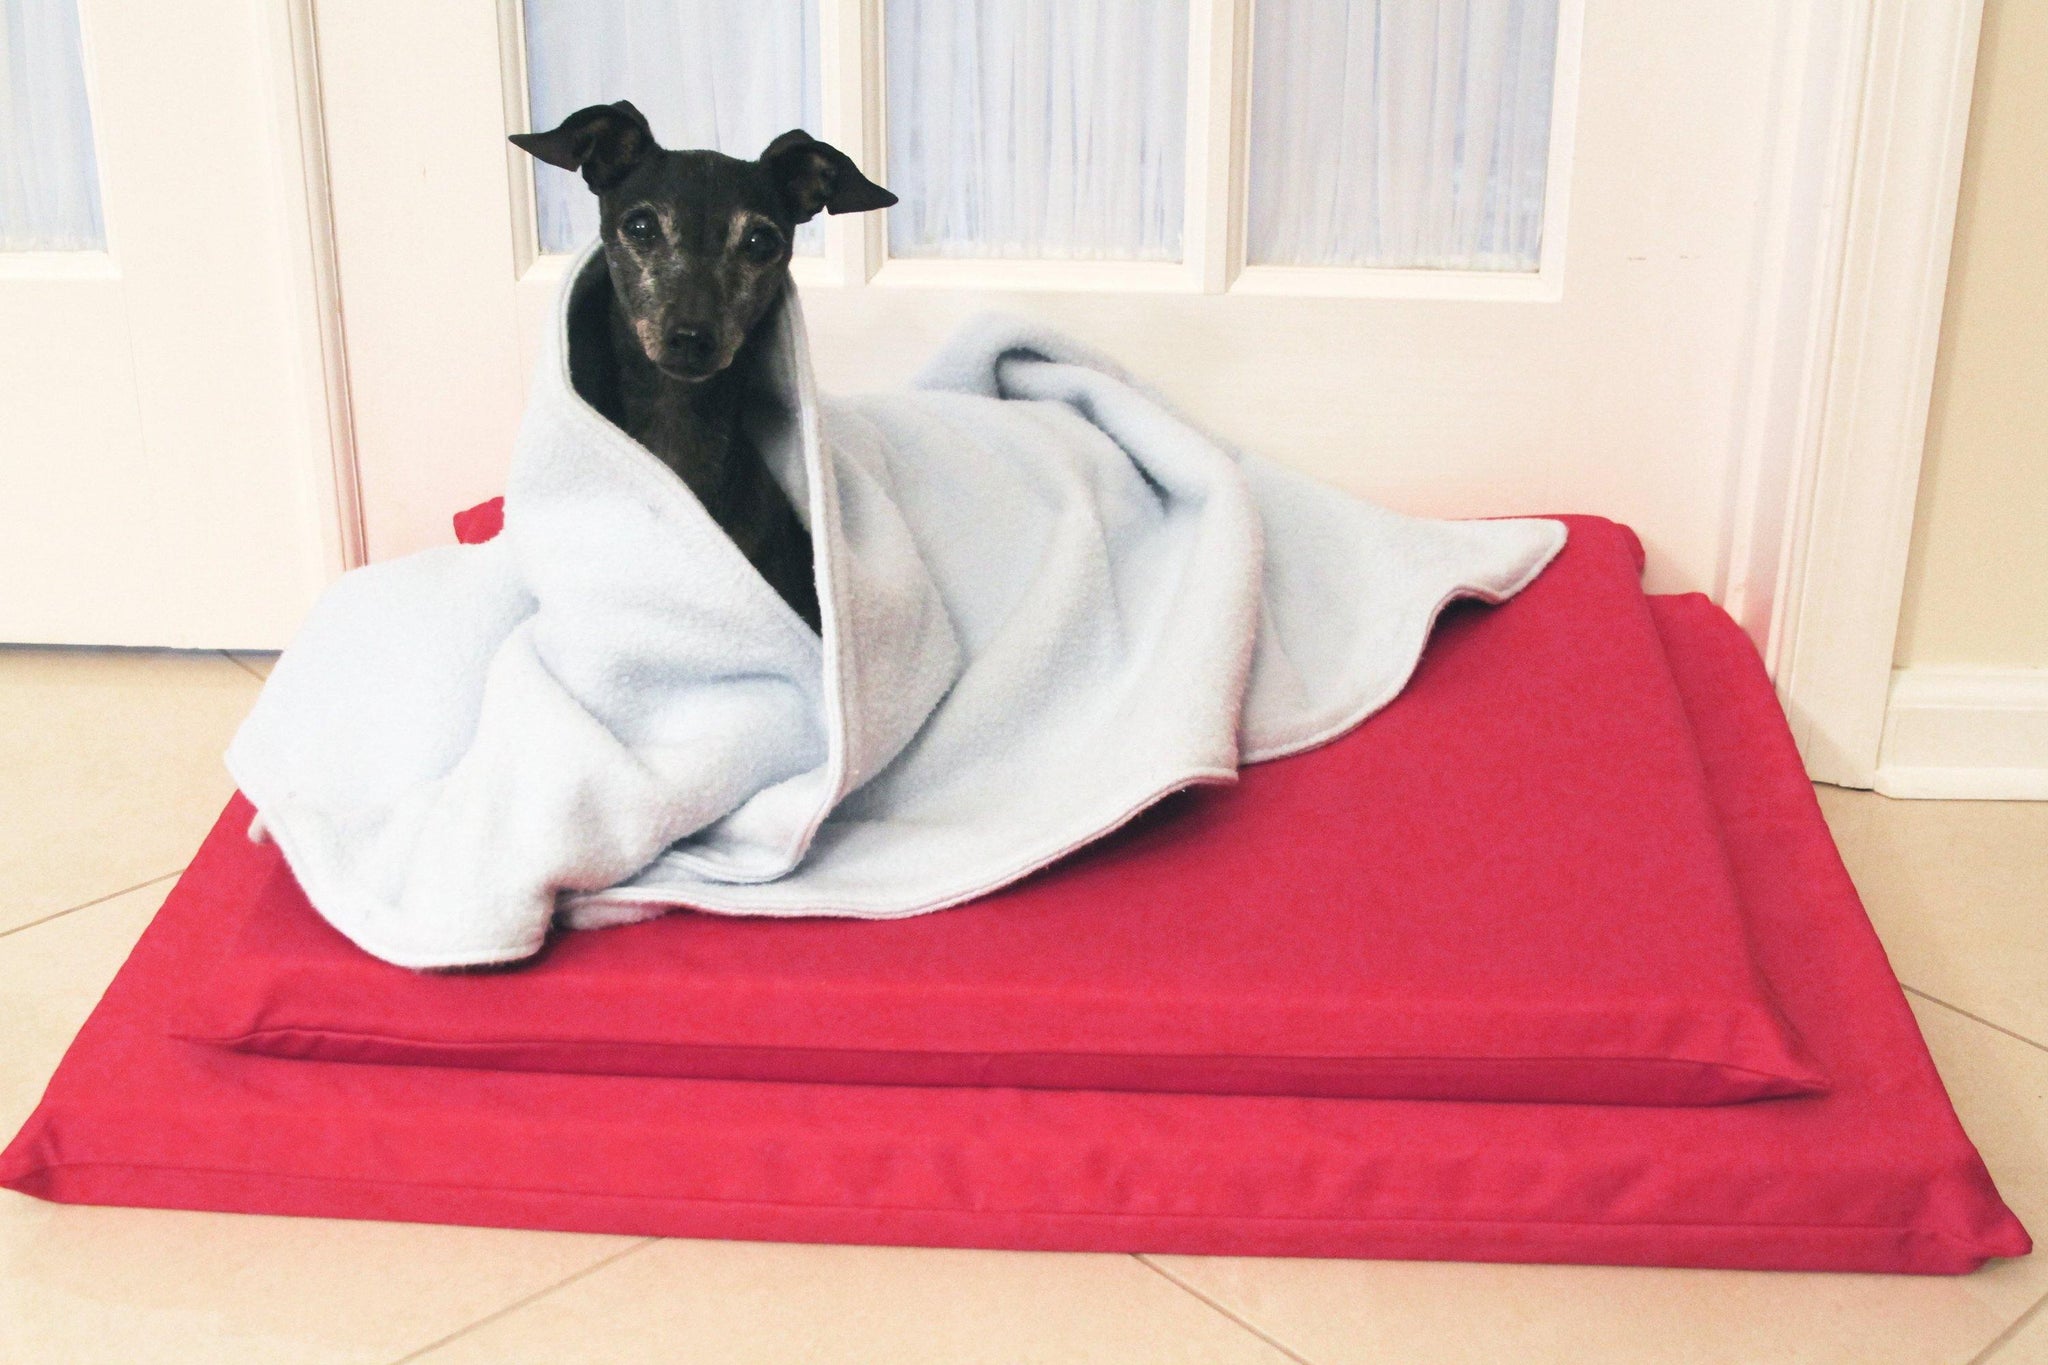 Black dog on a red mat wrapped in a blue blanket.